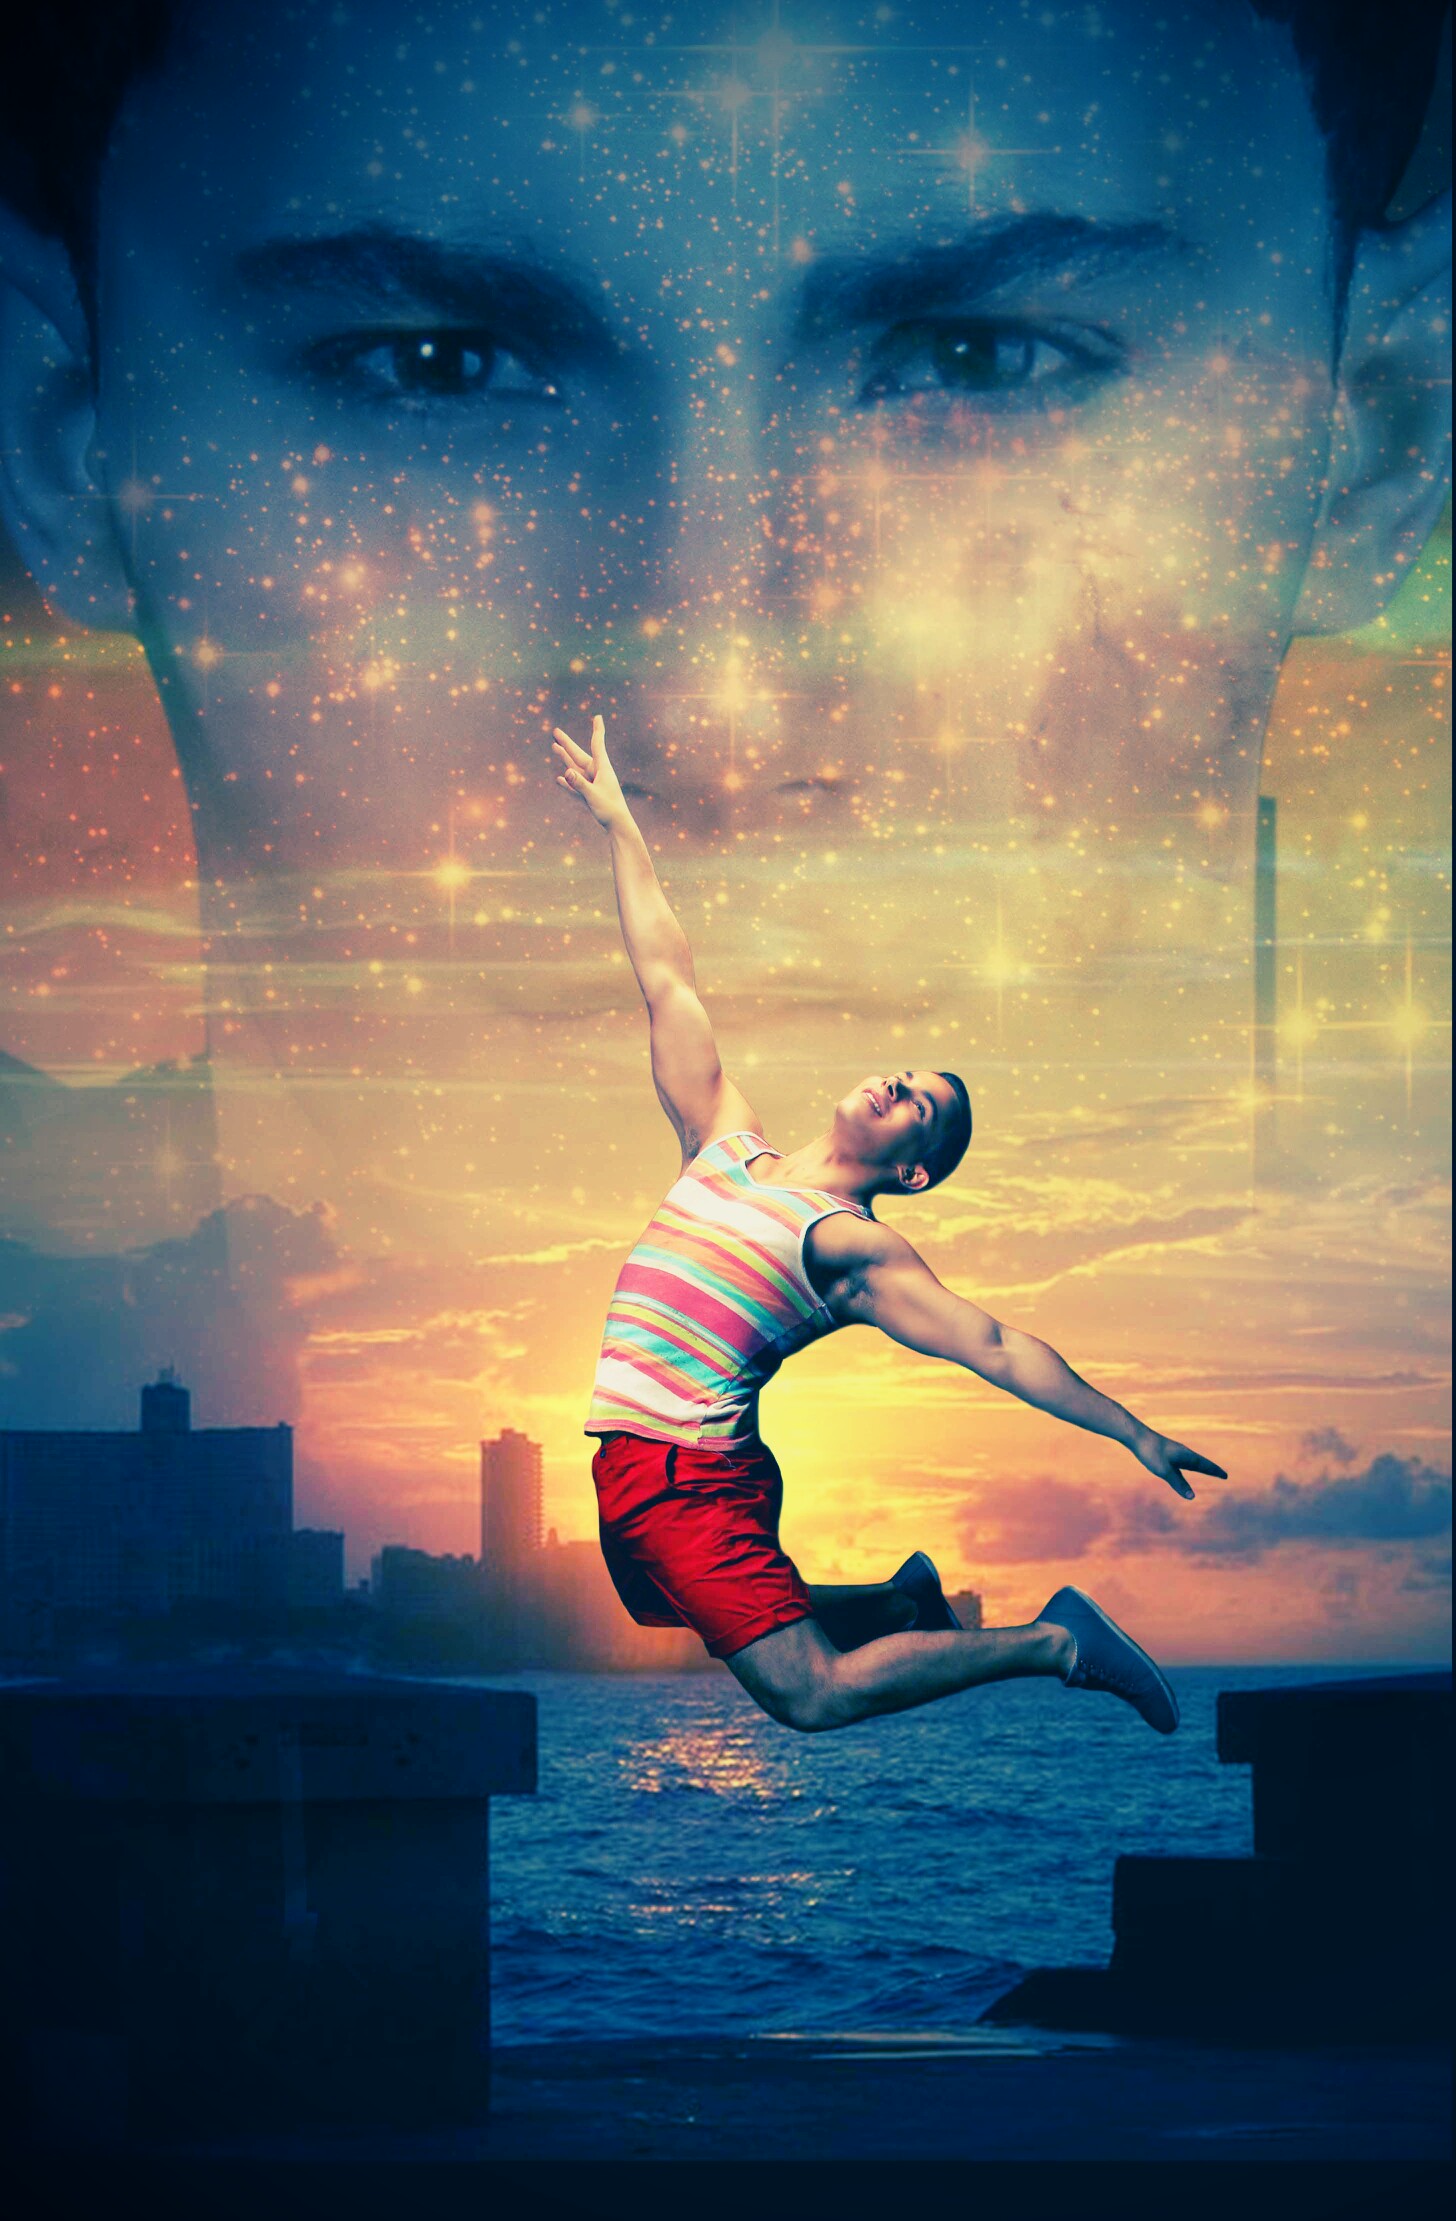 CARLOS: THE SEARCH FOR A DREAM The story of a boy from Cuba (Carlos) son of a Doctor wanting to be a Dancer: Fights to express his passion for dance, despite bullying and rejection by both family and society.